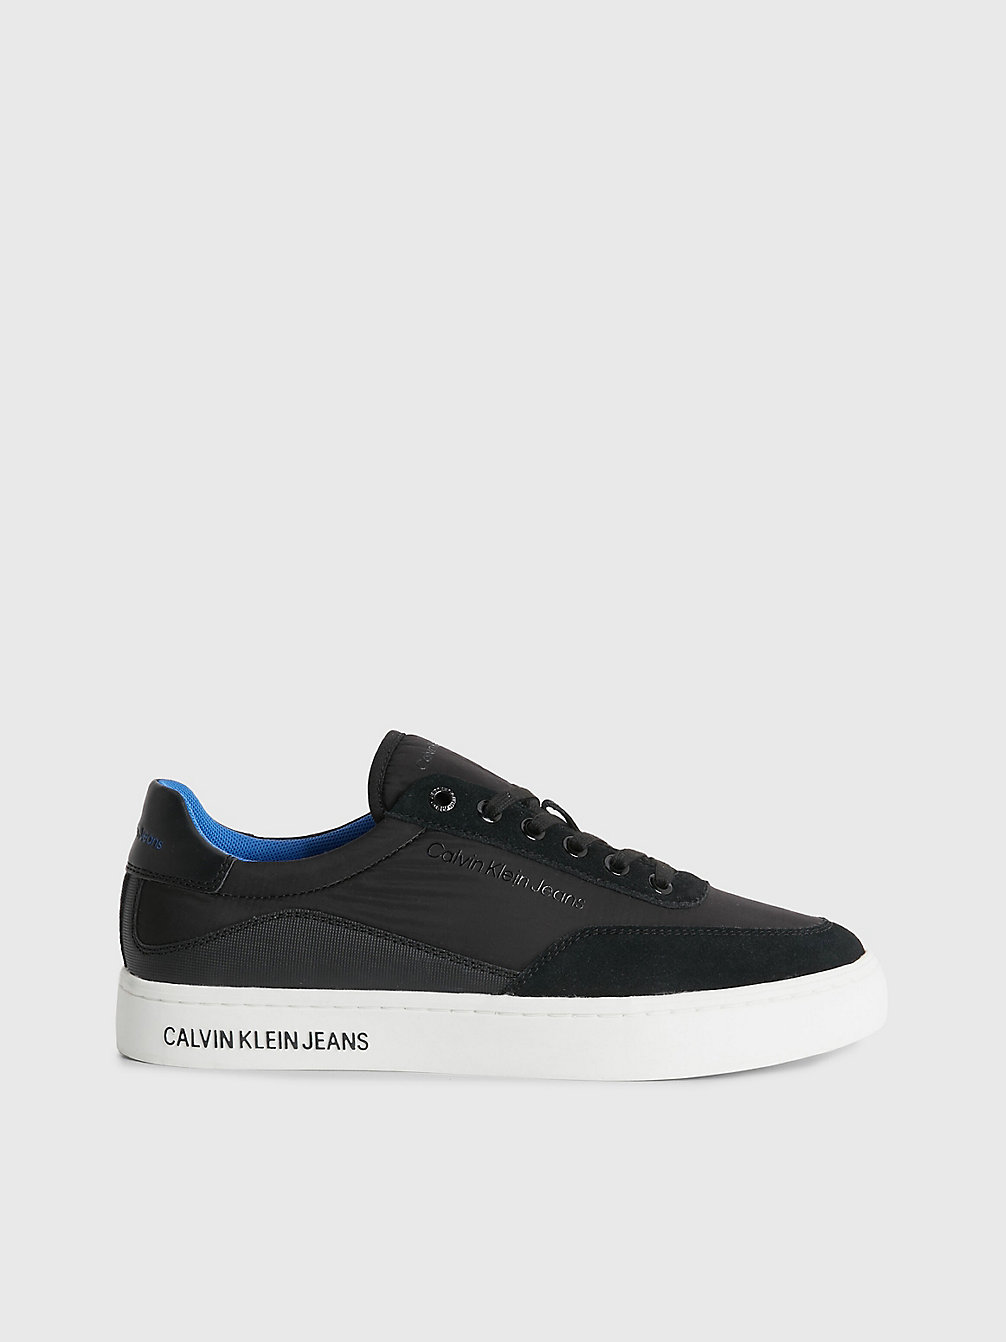 BLACK/IMPERIAL BLU Recycled Trainers undefined women Calvin Klein